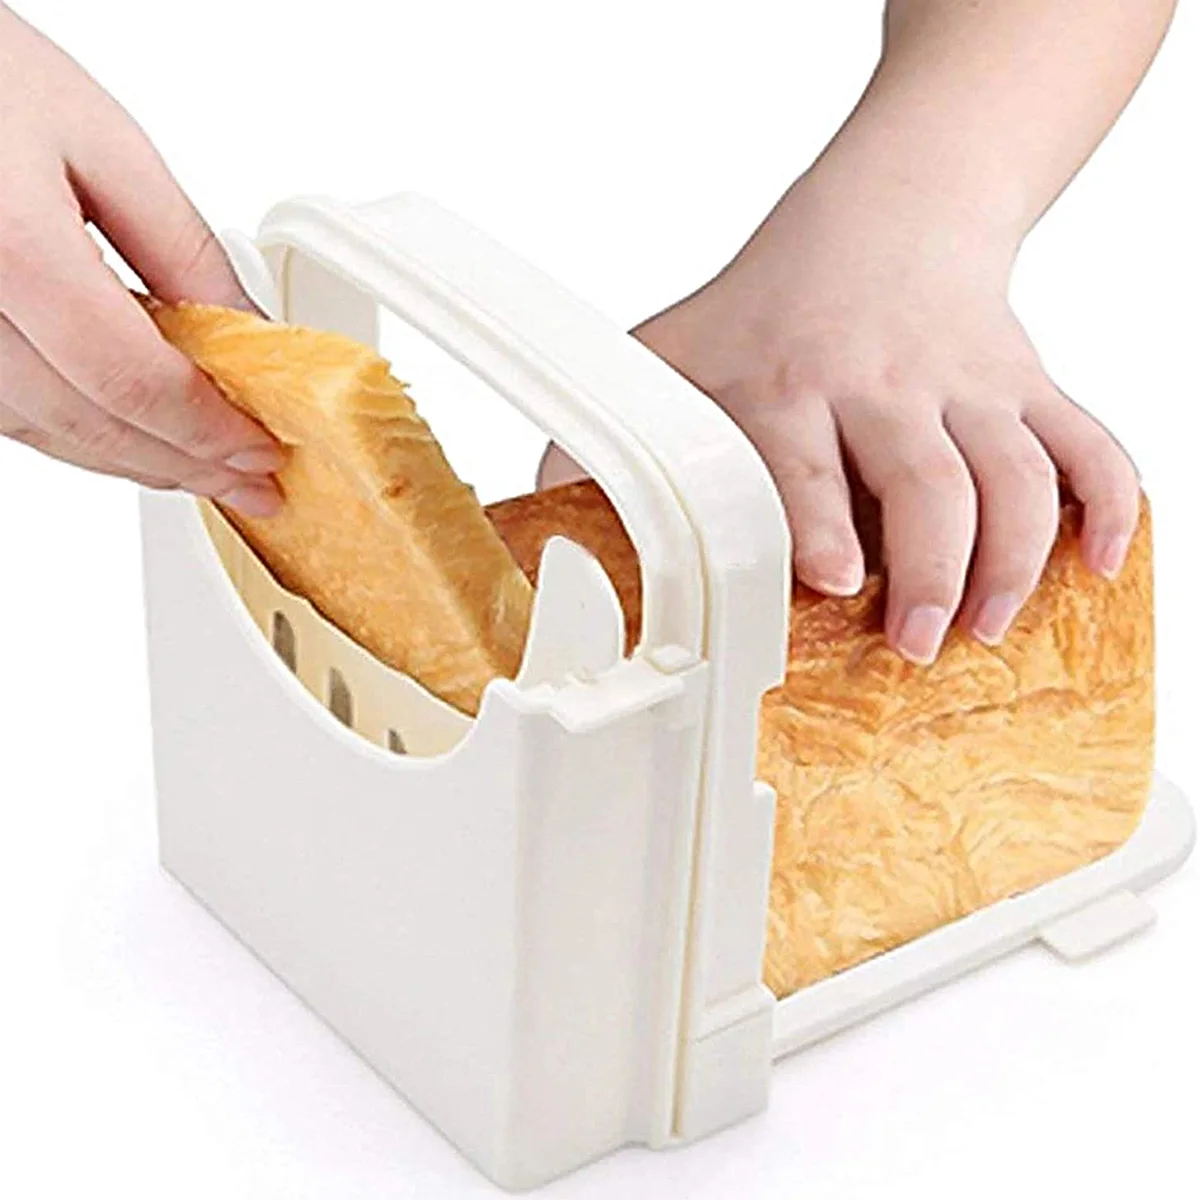 https://ae01.alicdn.com/kf/Sb5b5c248e5a64a8fbb8d4368cd1626e1g/Collapsible-bread-slicer-adjustable-toast-slicer-tool-plastic-bread-cutting-guide-Homemade-bread-kitchen-baking-tool.jpg